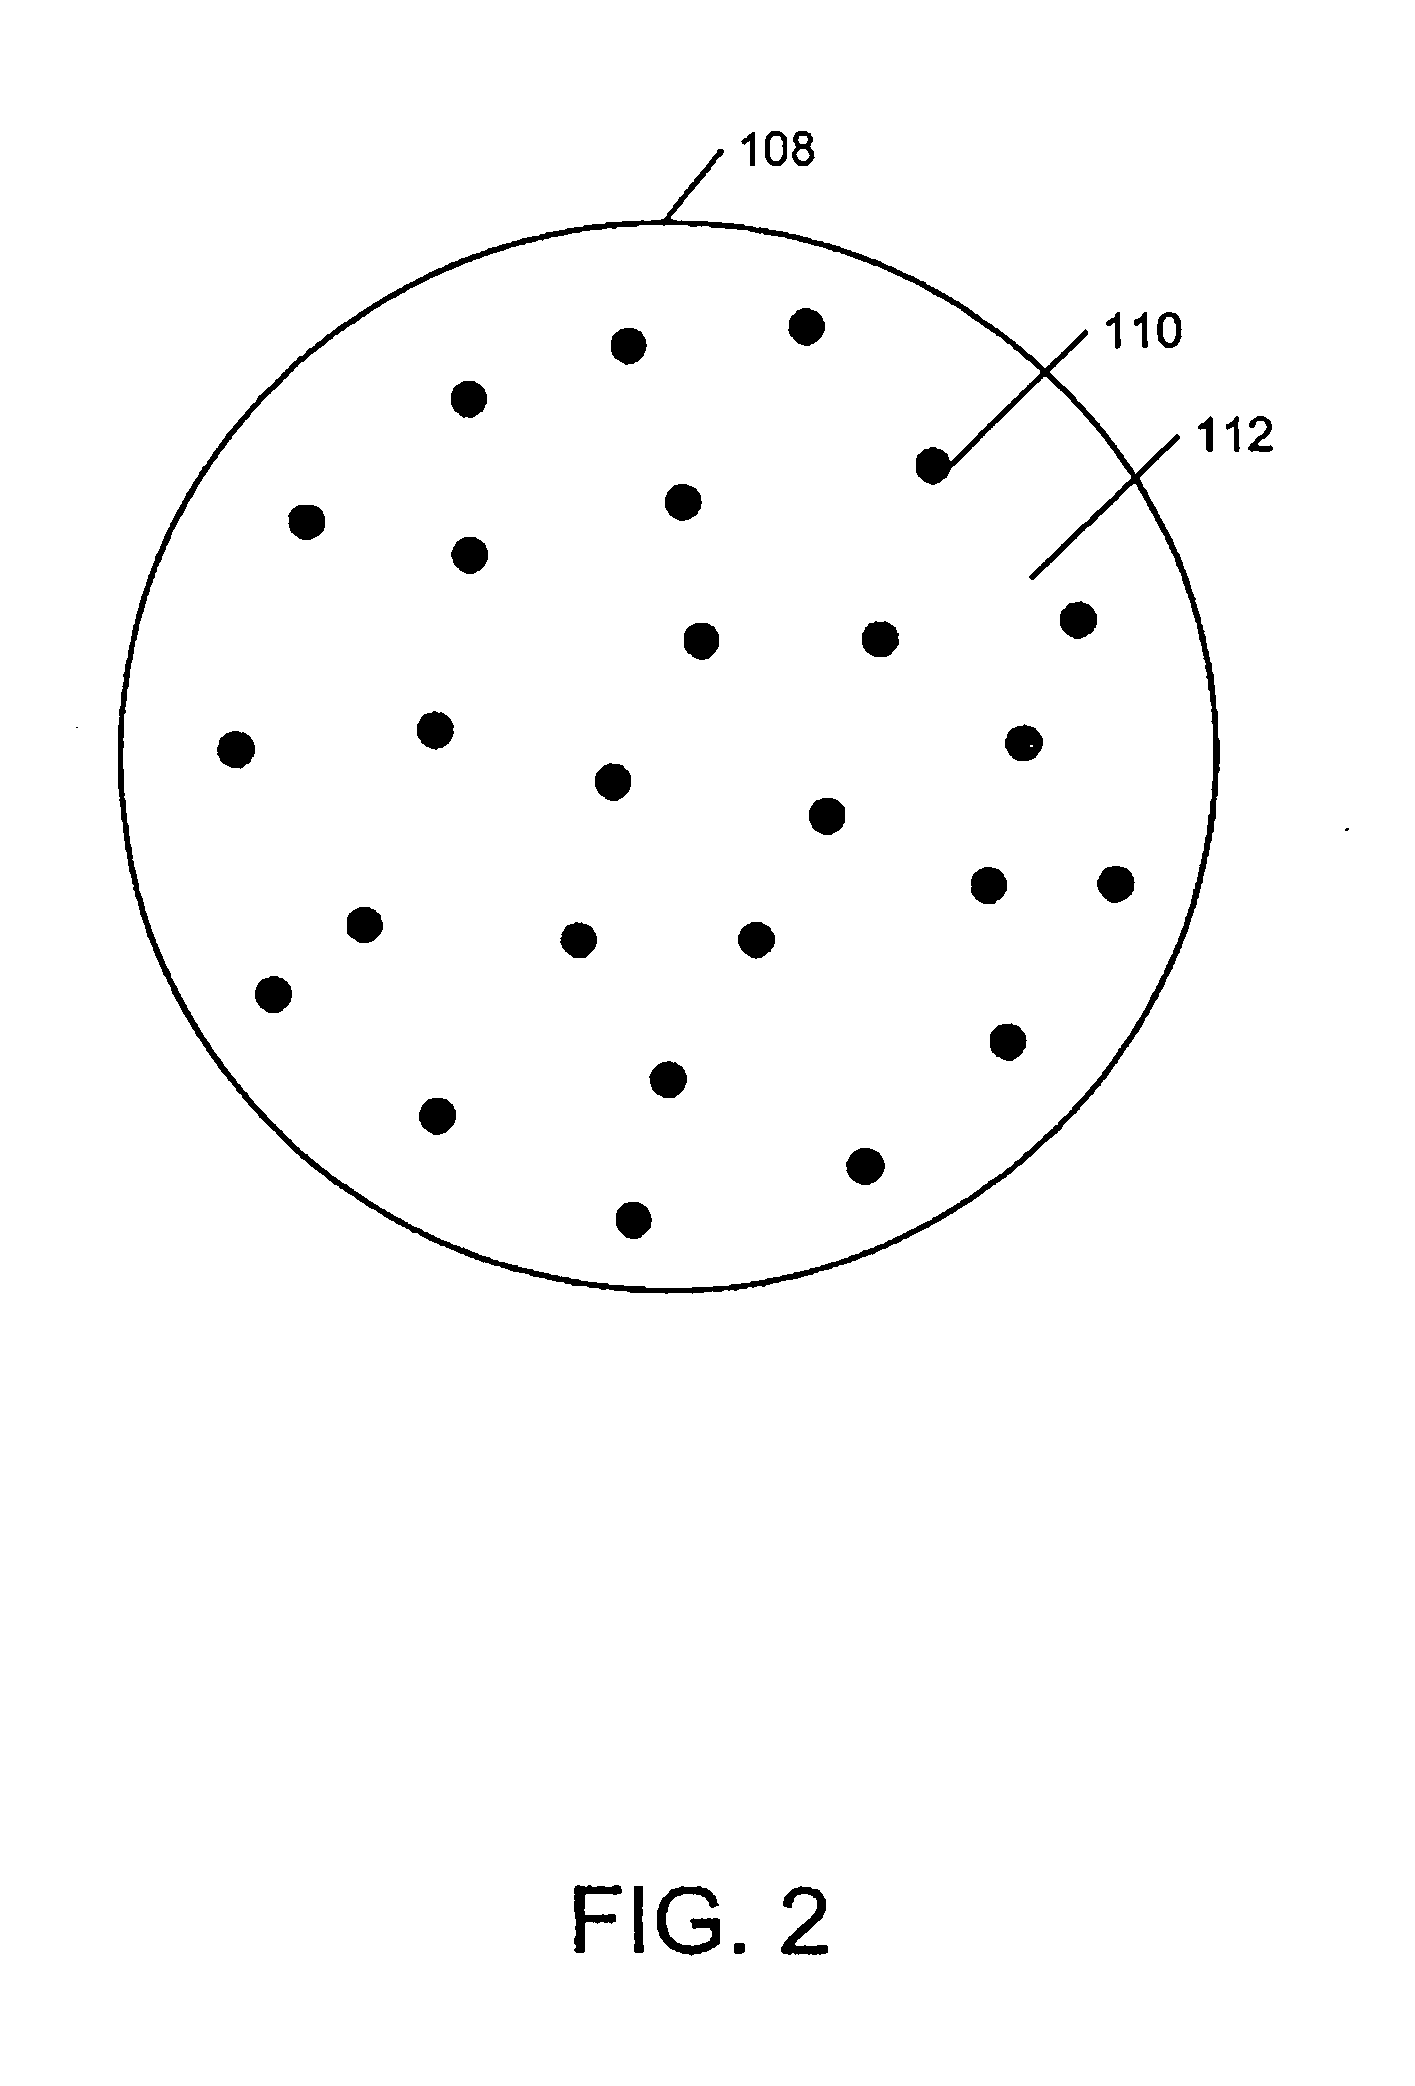 Gas dispersion manufacture of nanoparticulates, and nanoparticulate-containing products and processing thereof